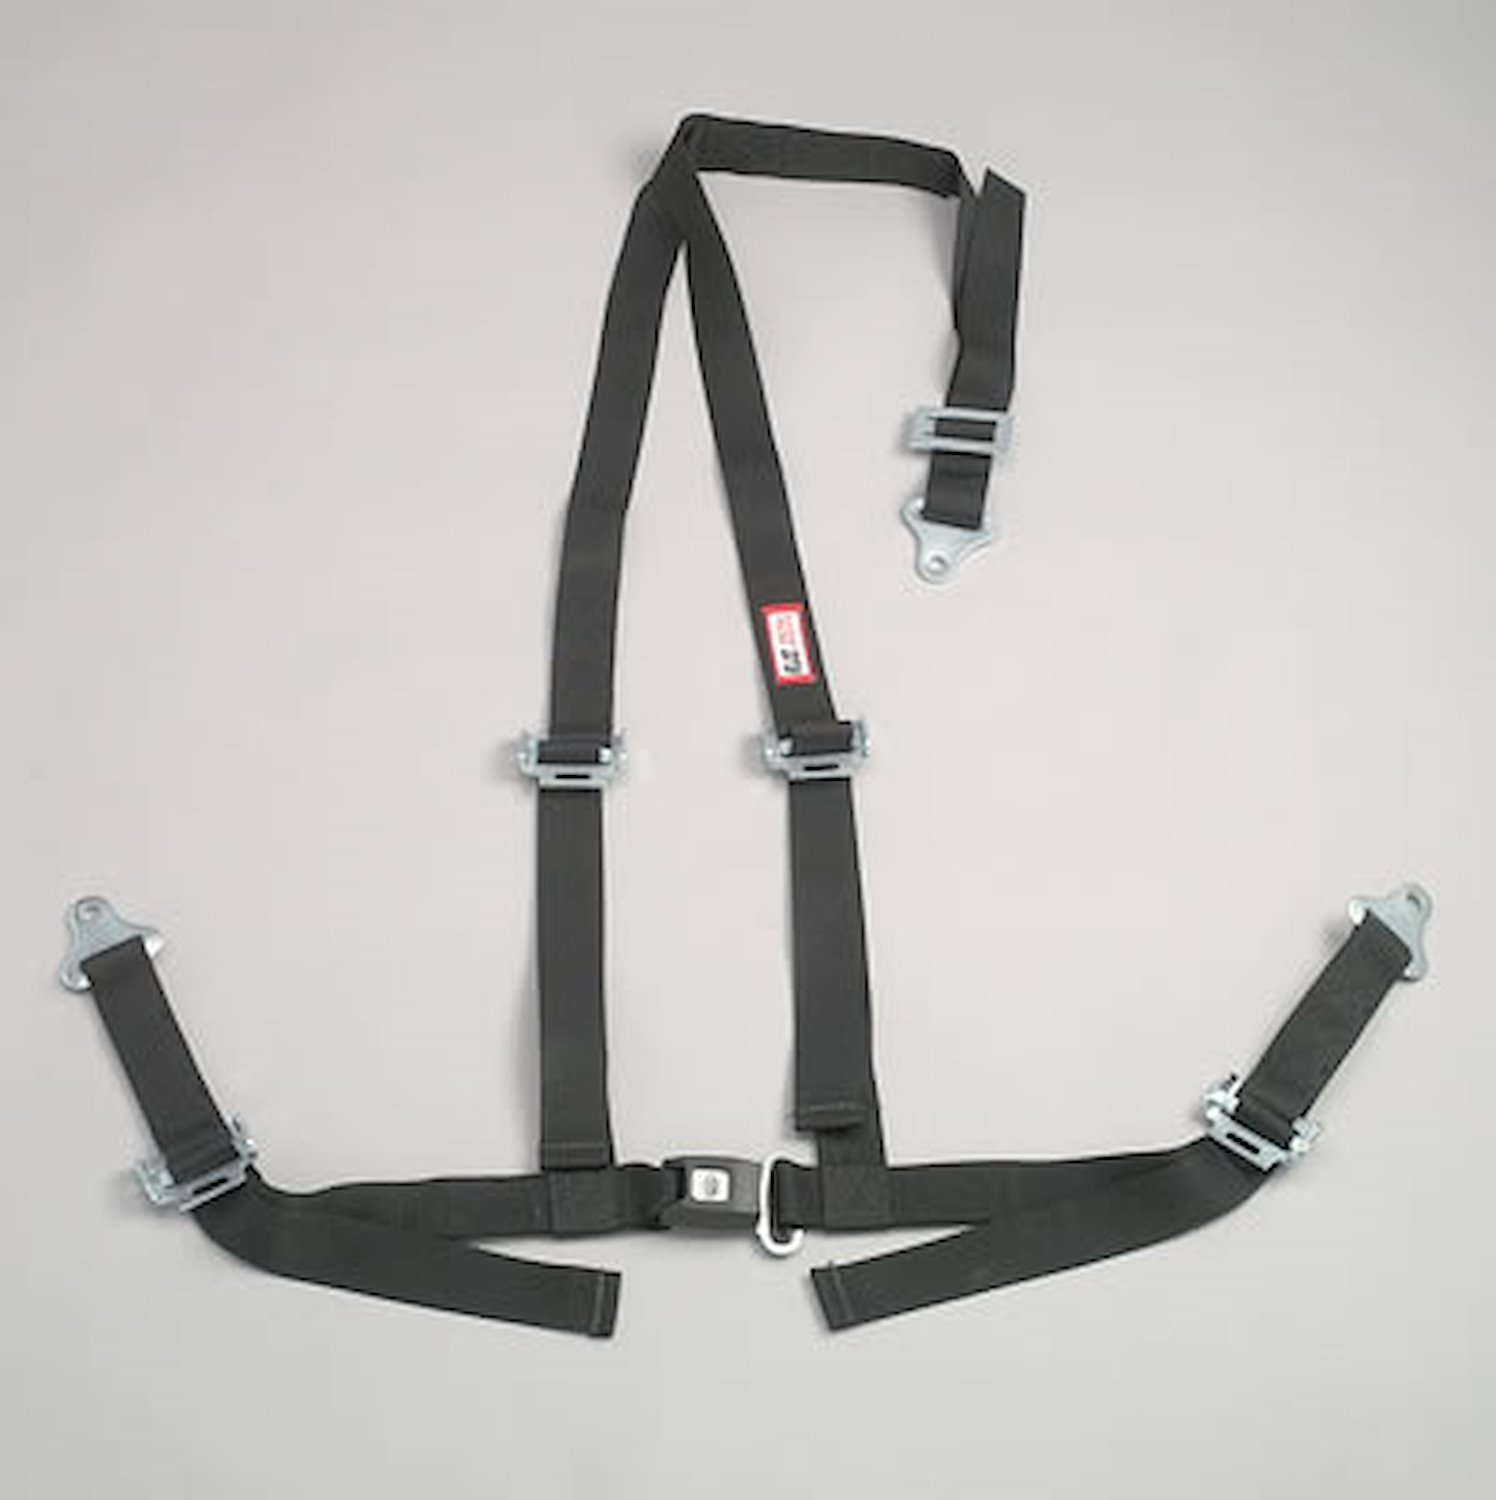 NON-SFI B&T HARNESS 2 PULL DOWN Lap Belt 2 S. H. V ROLL BAR Mount ALL SNAP ENDS w/STERNUM STRAP YELLOW